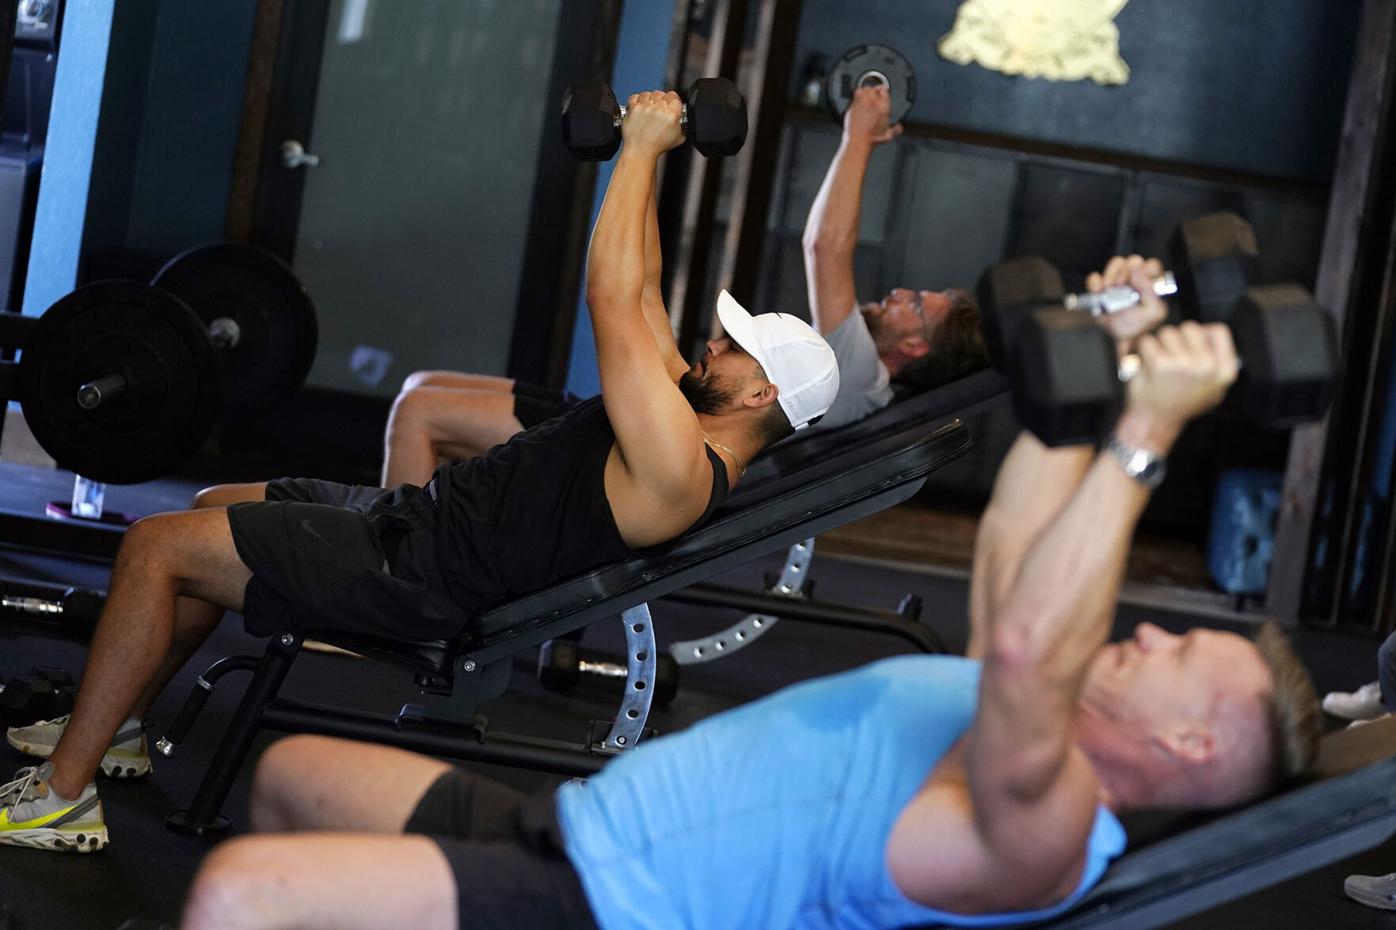 Americans have changed the way they exercise. Here's how gyms are adapting, Health